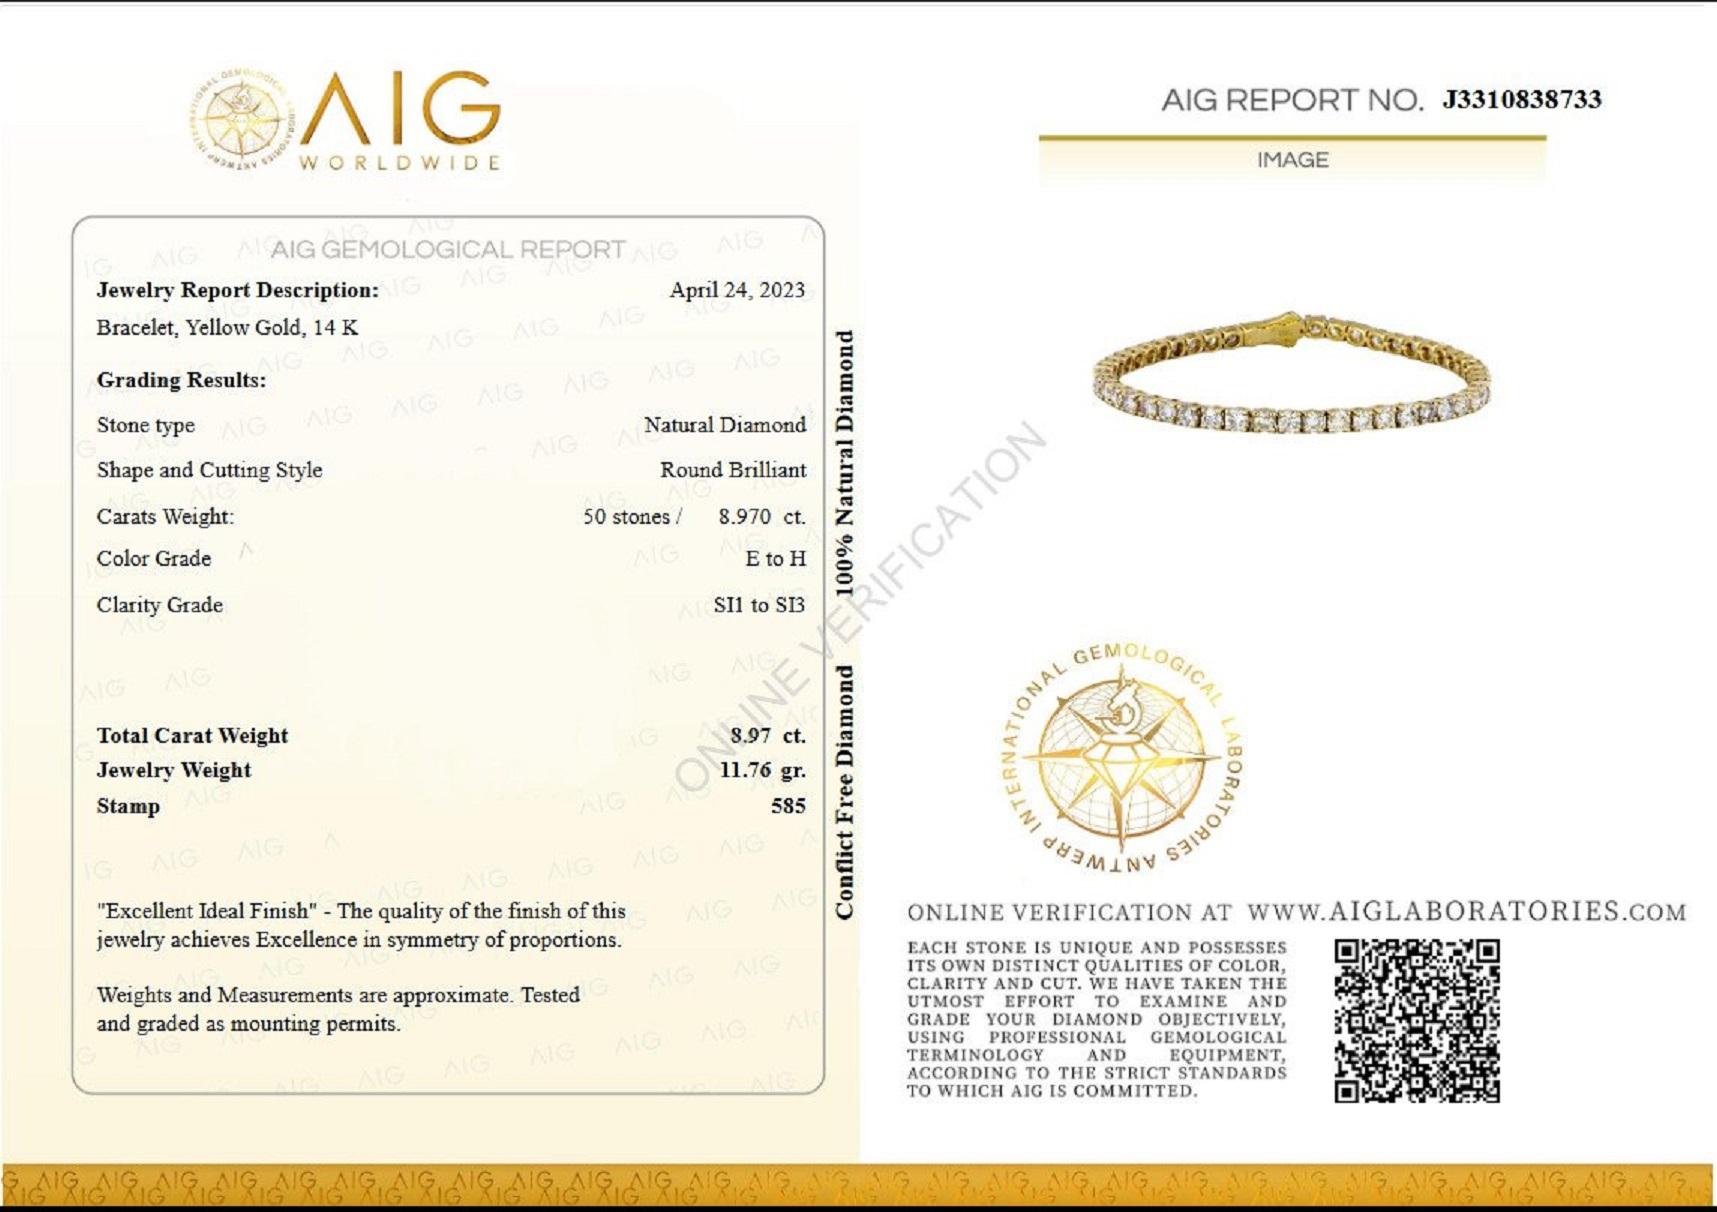 ** In Hong Kong and the USA the VAT is 0%.
___________
Natural Diamonds
Cut: Round Brilliant
Carat: 8.97 cttw / 50 stones
Color: E to H
Clarity: SI1 to SI3

Item ships from Israeli Diamonds Exchange, customers are responsible for any local customs